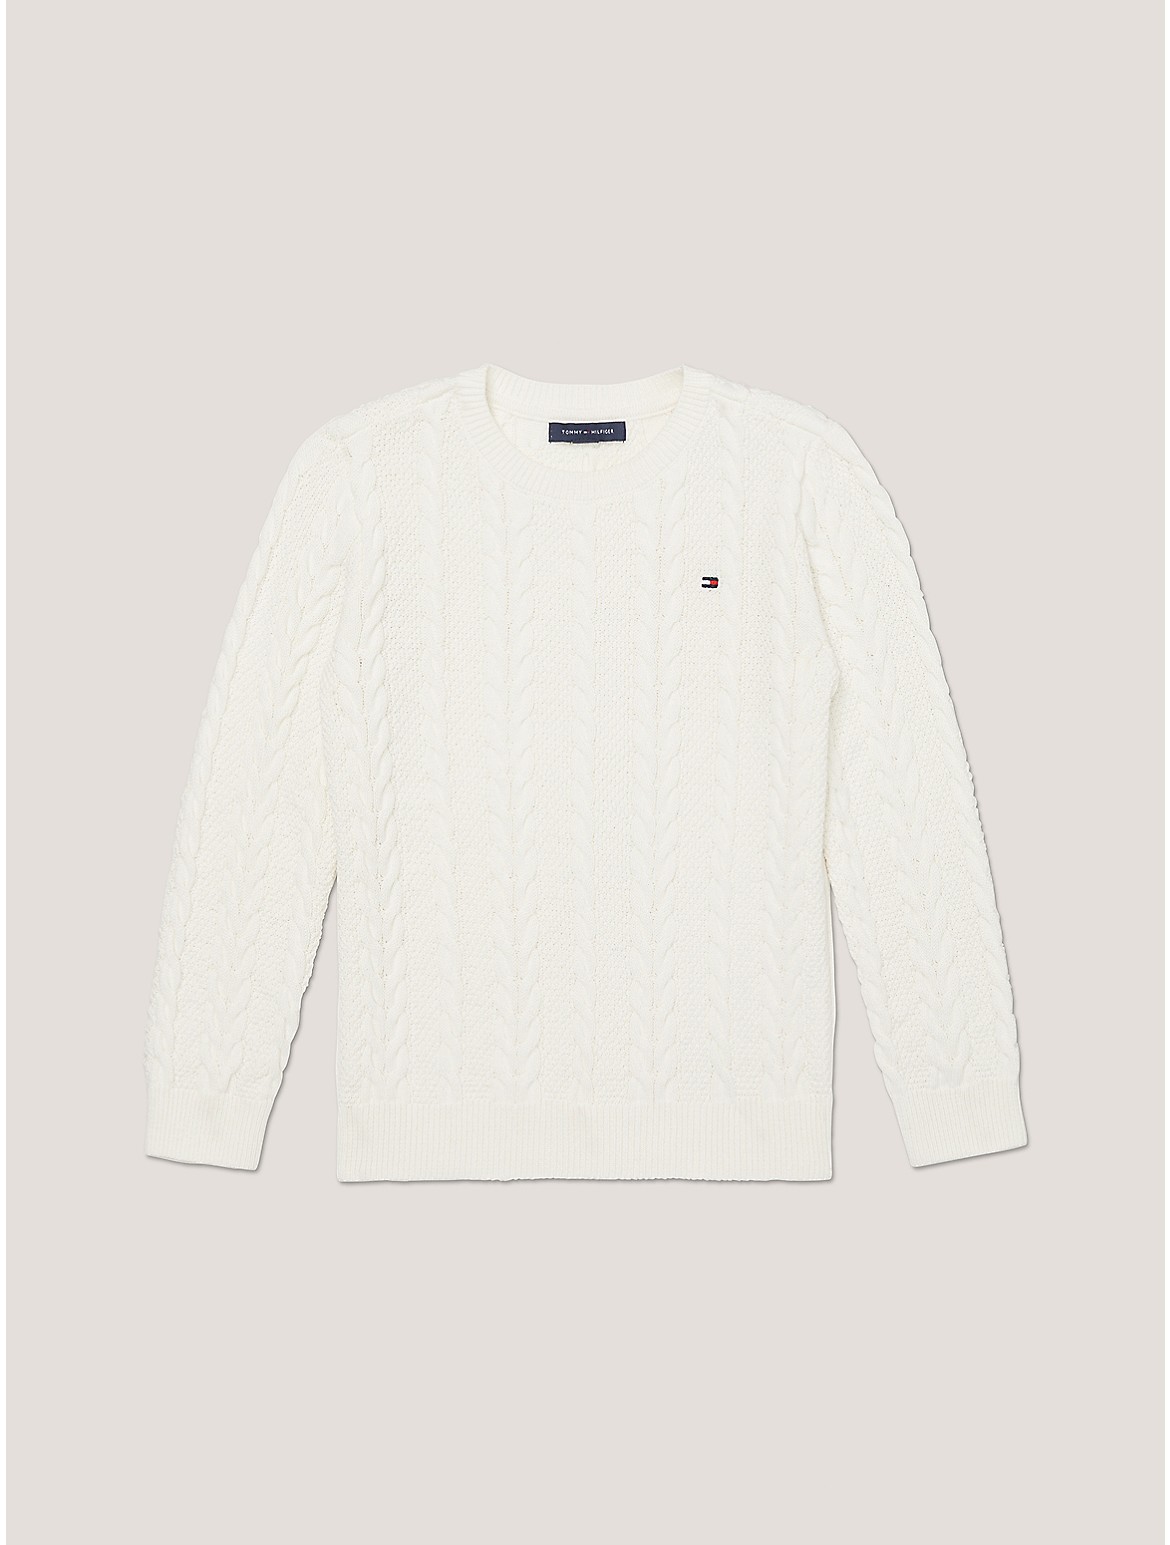 Tommy Hilfiger Boys' Kids' Cable Knit Sweater - White - S